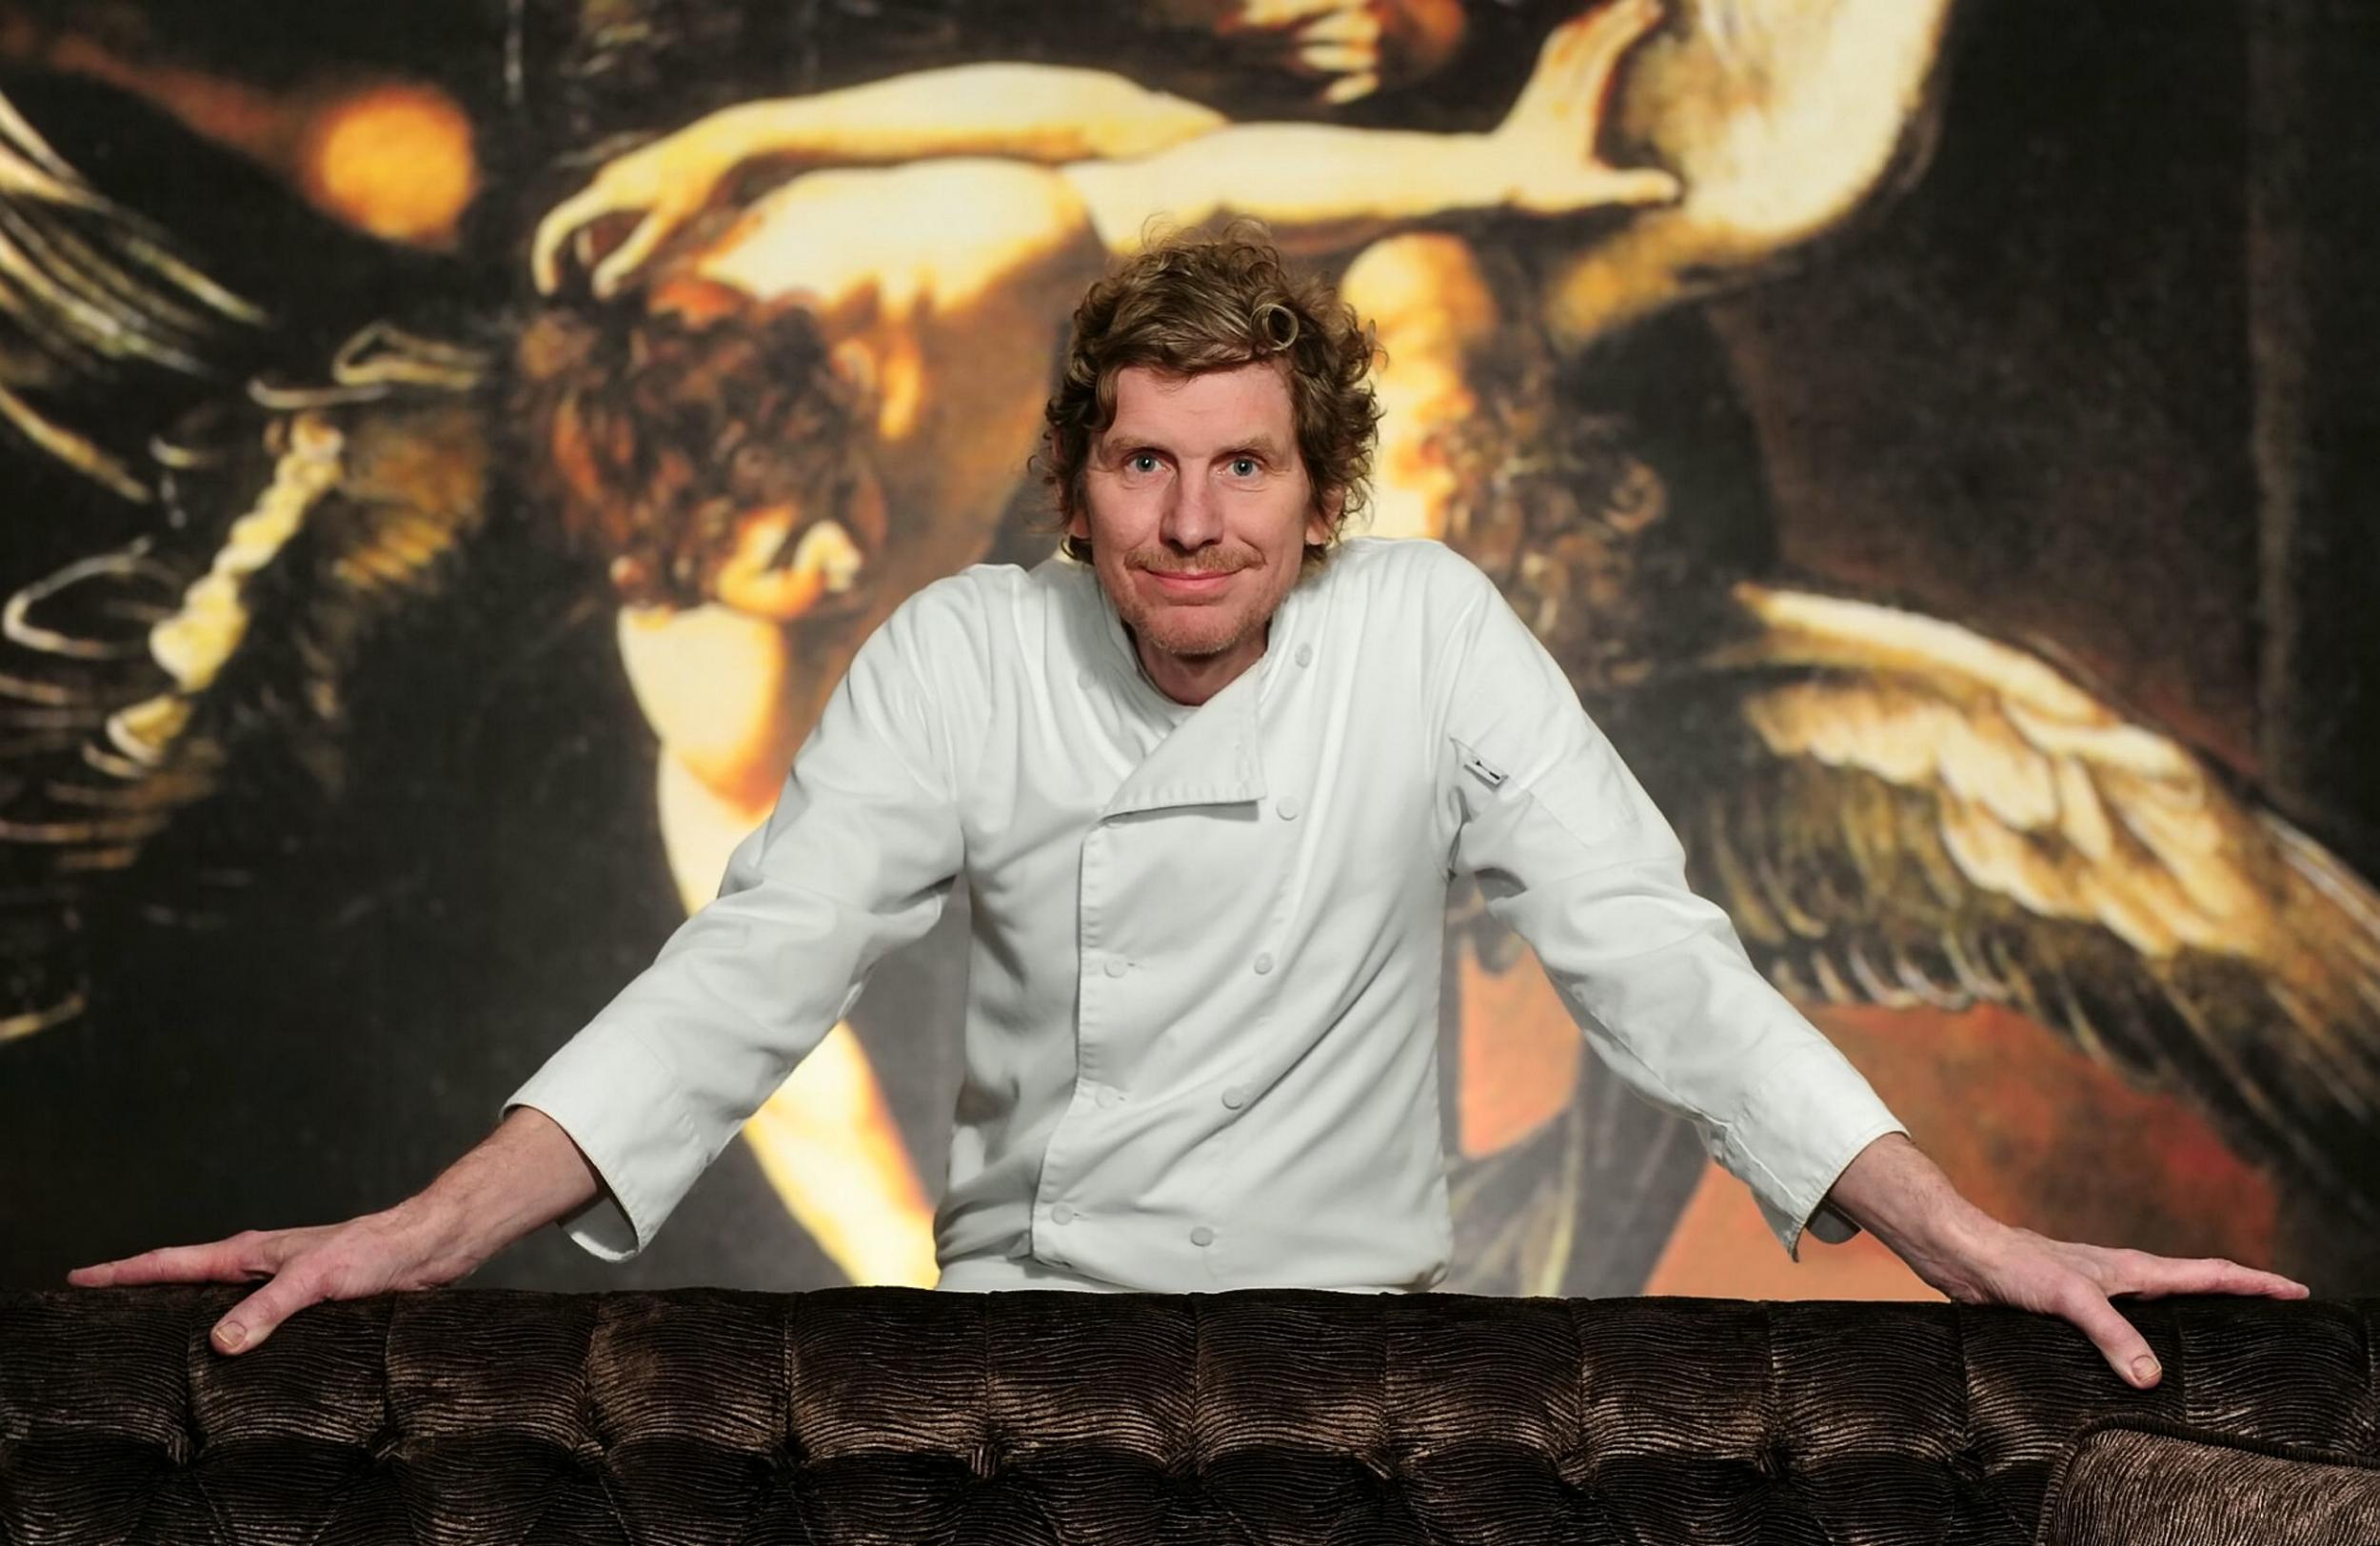 Paul Kitching, owner of the Michelin starred 21212 restaurant in Edinburgh